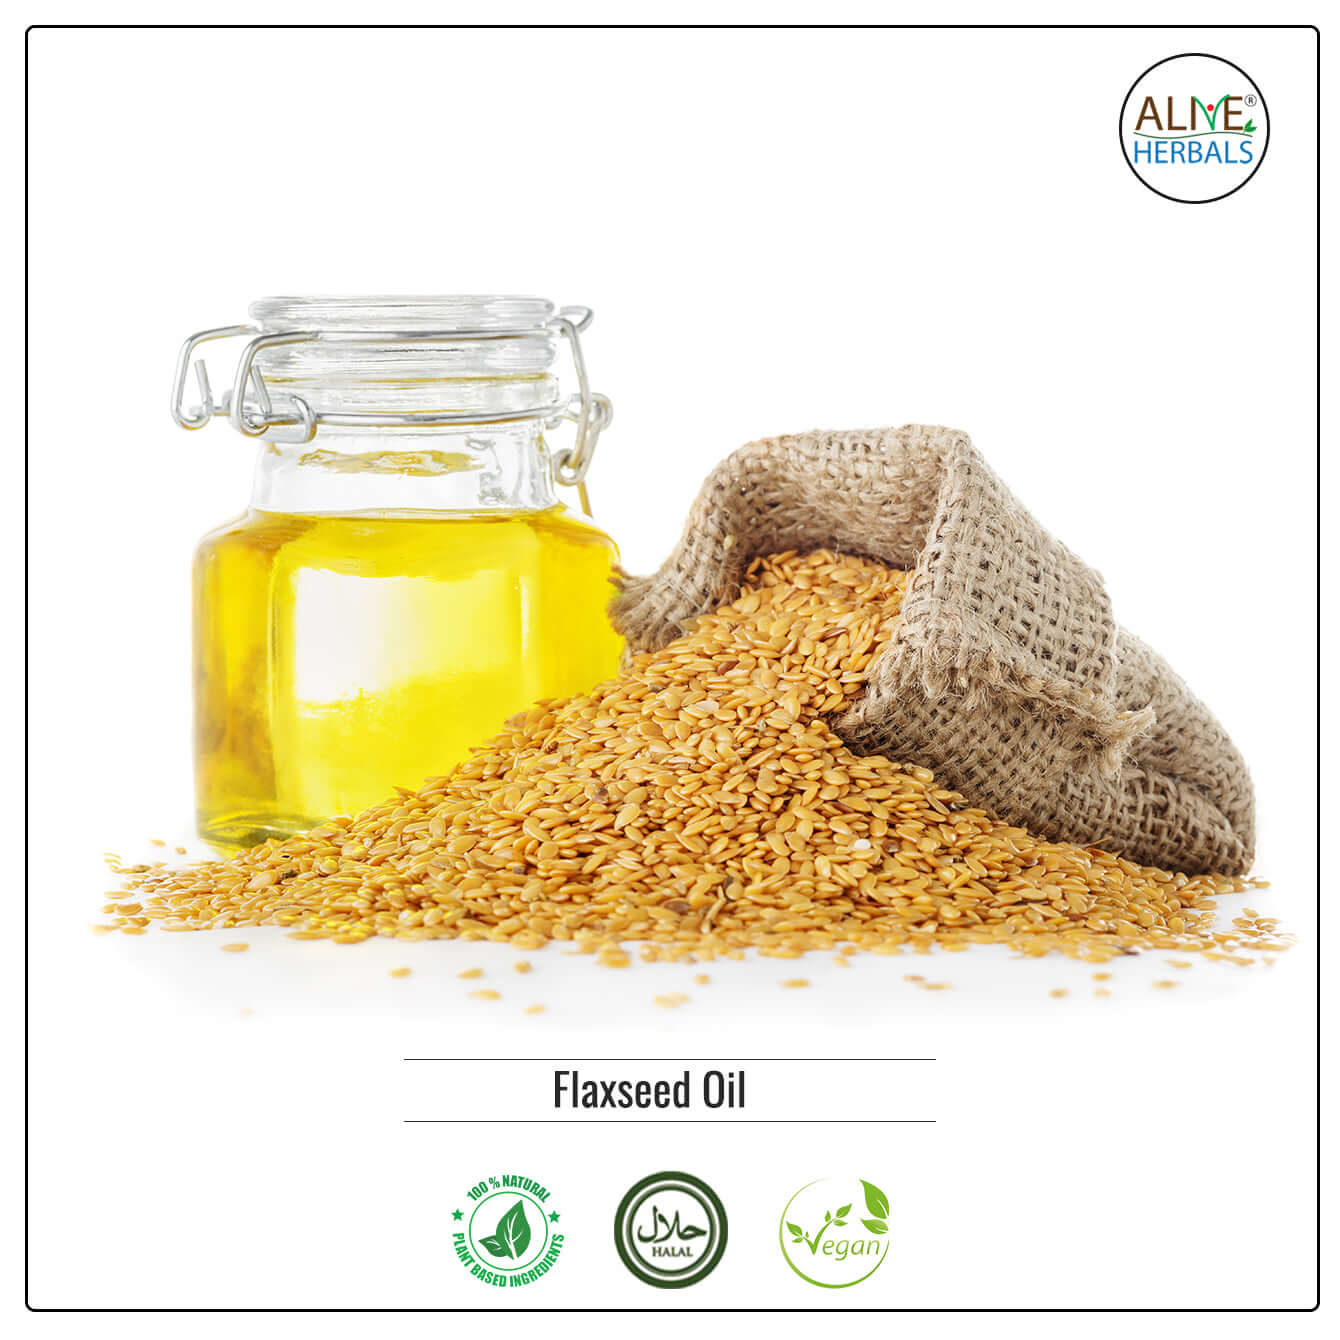 Flaxseed Oil - Shop at Natural Food Store | Alive Herbals.